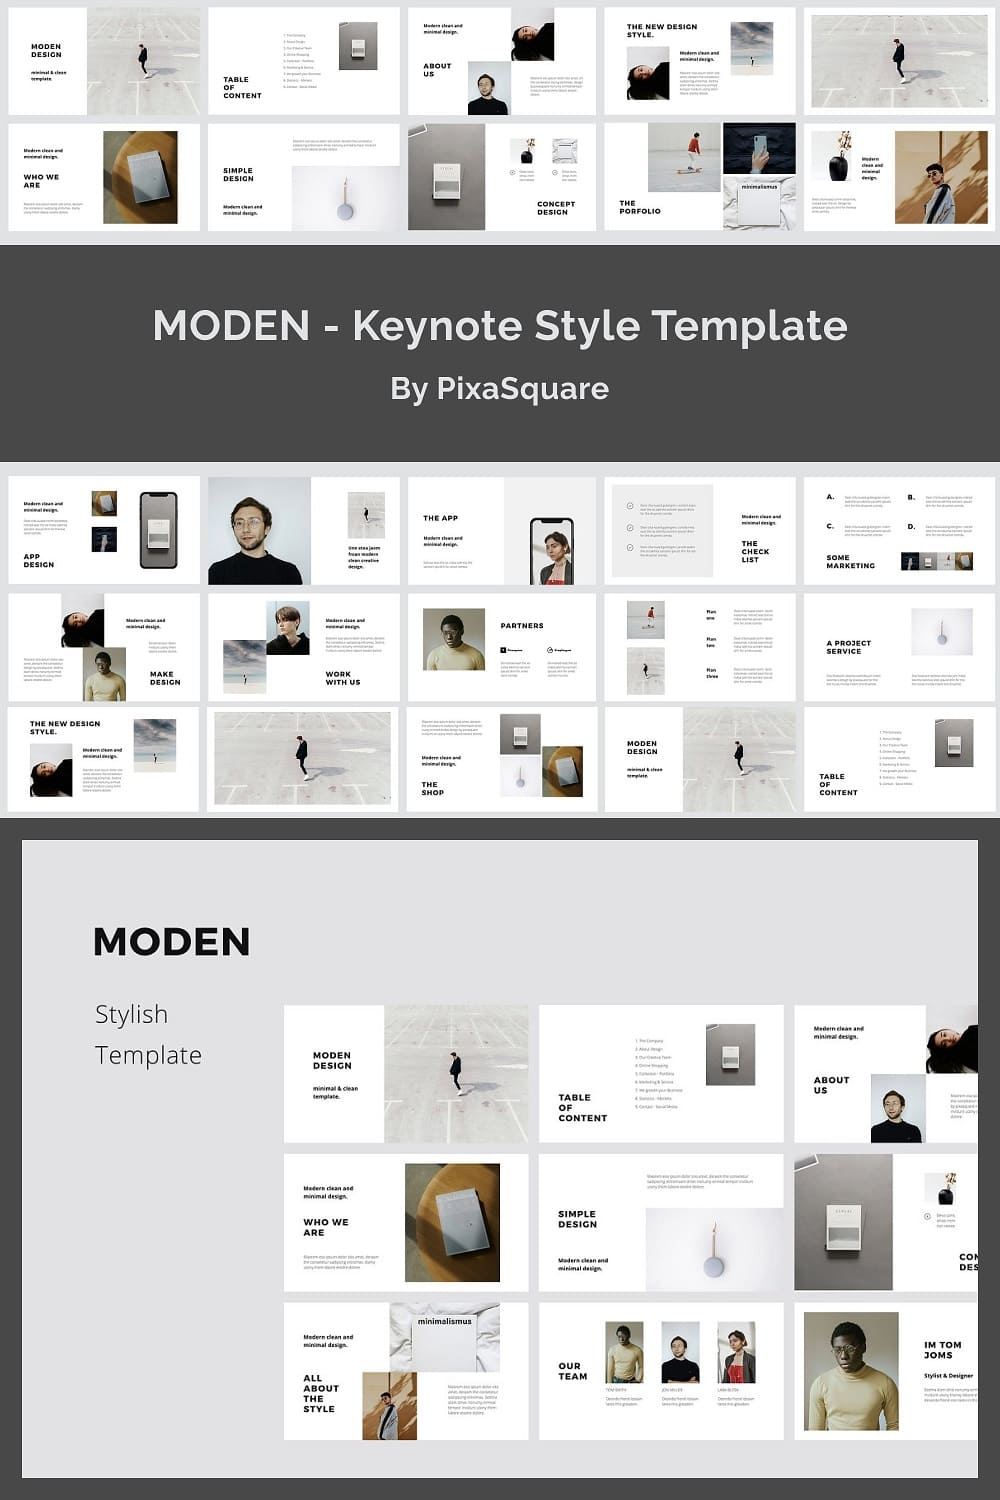 Title with Slides - Moden Stylish Template.